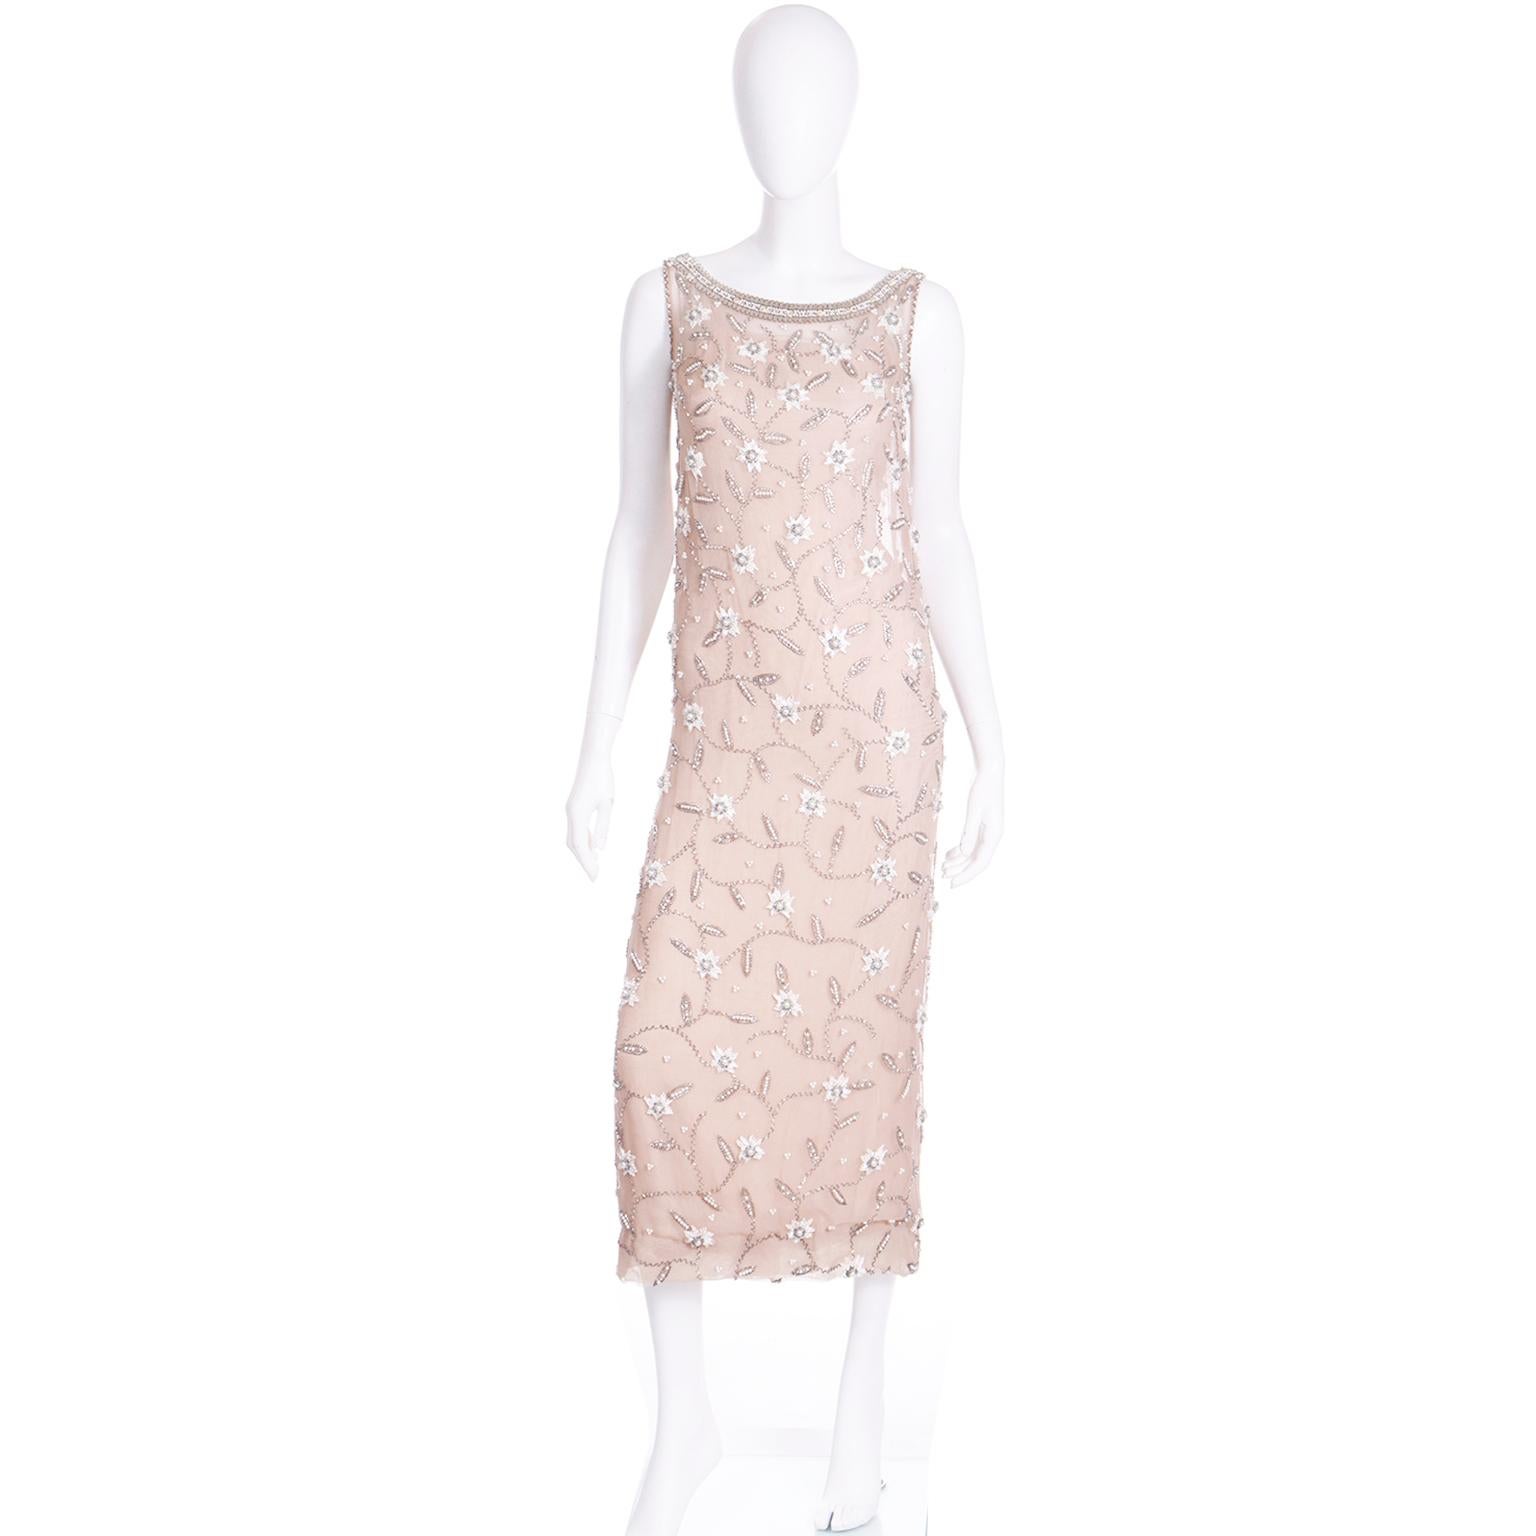 This elegant evening dress was designed in the 1970's by Victoria Royal and sold at Robinson's in California. The outer layer of the dress is a fine sheer champagne mesh fabric that is covered in beads, embroidery, faux pearls, paillettes and